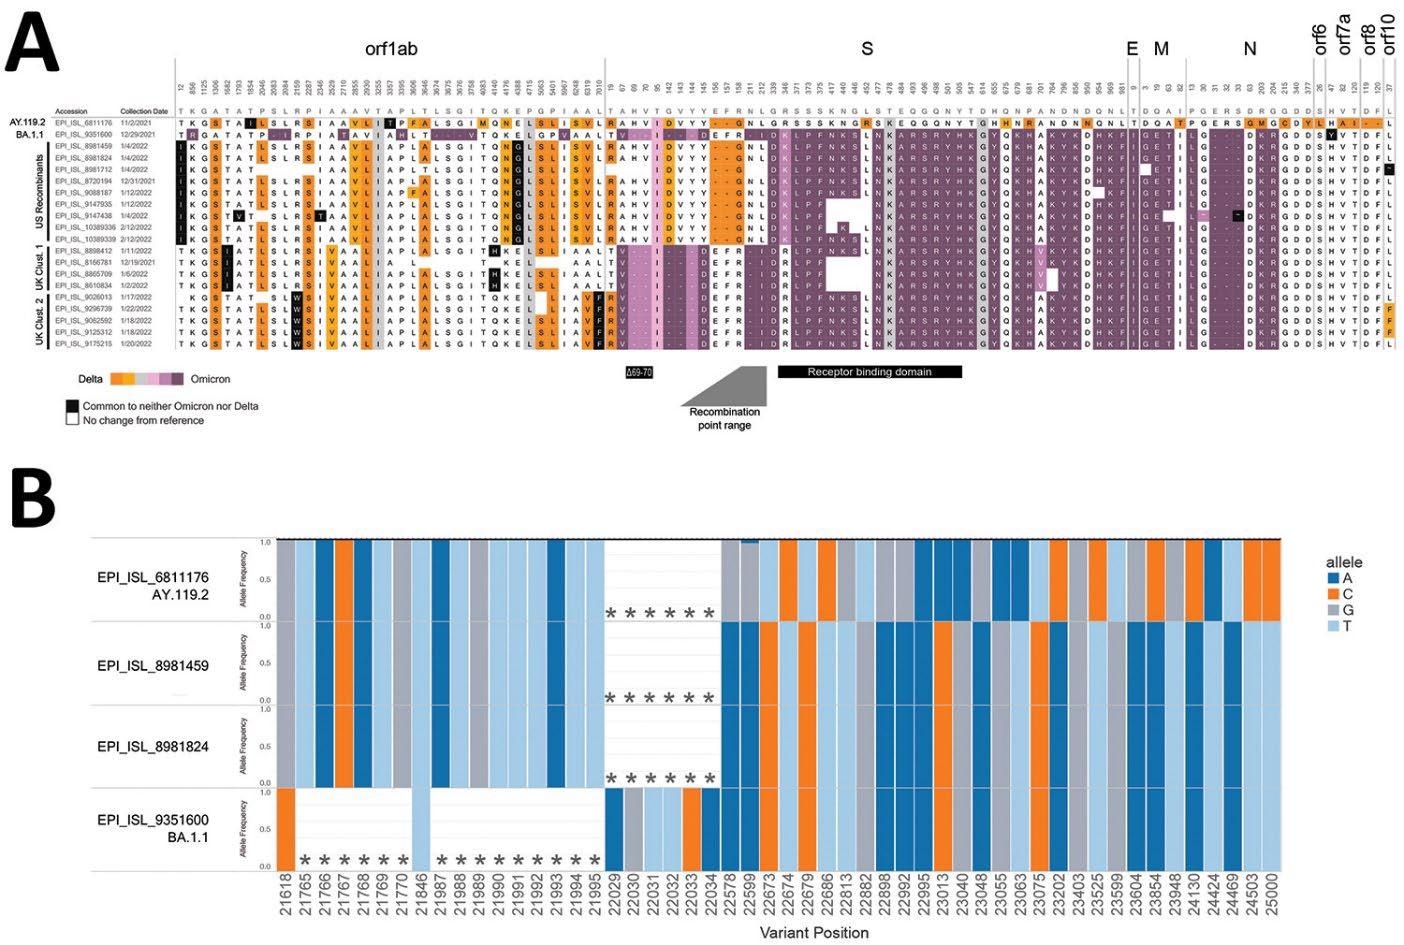 Composition of candidate recombinant SARS-CoV-2 genomes